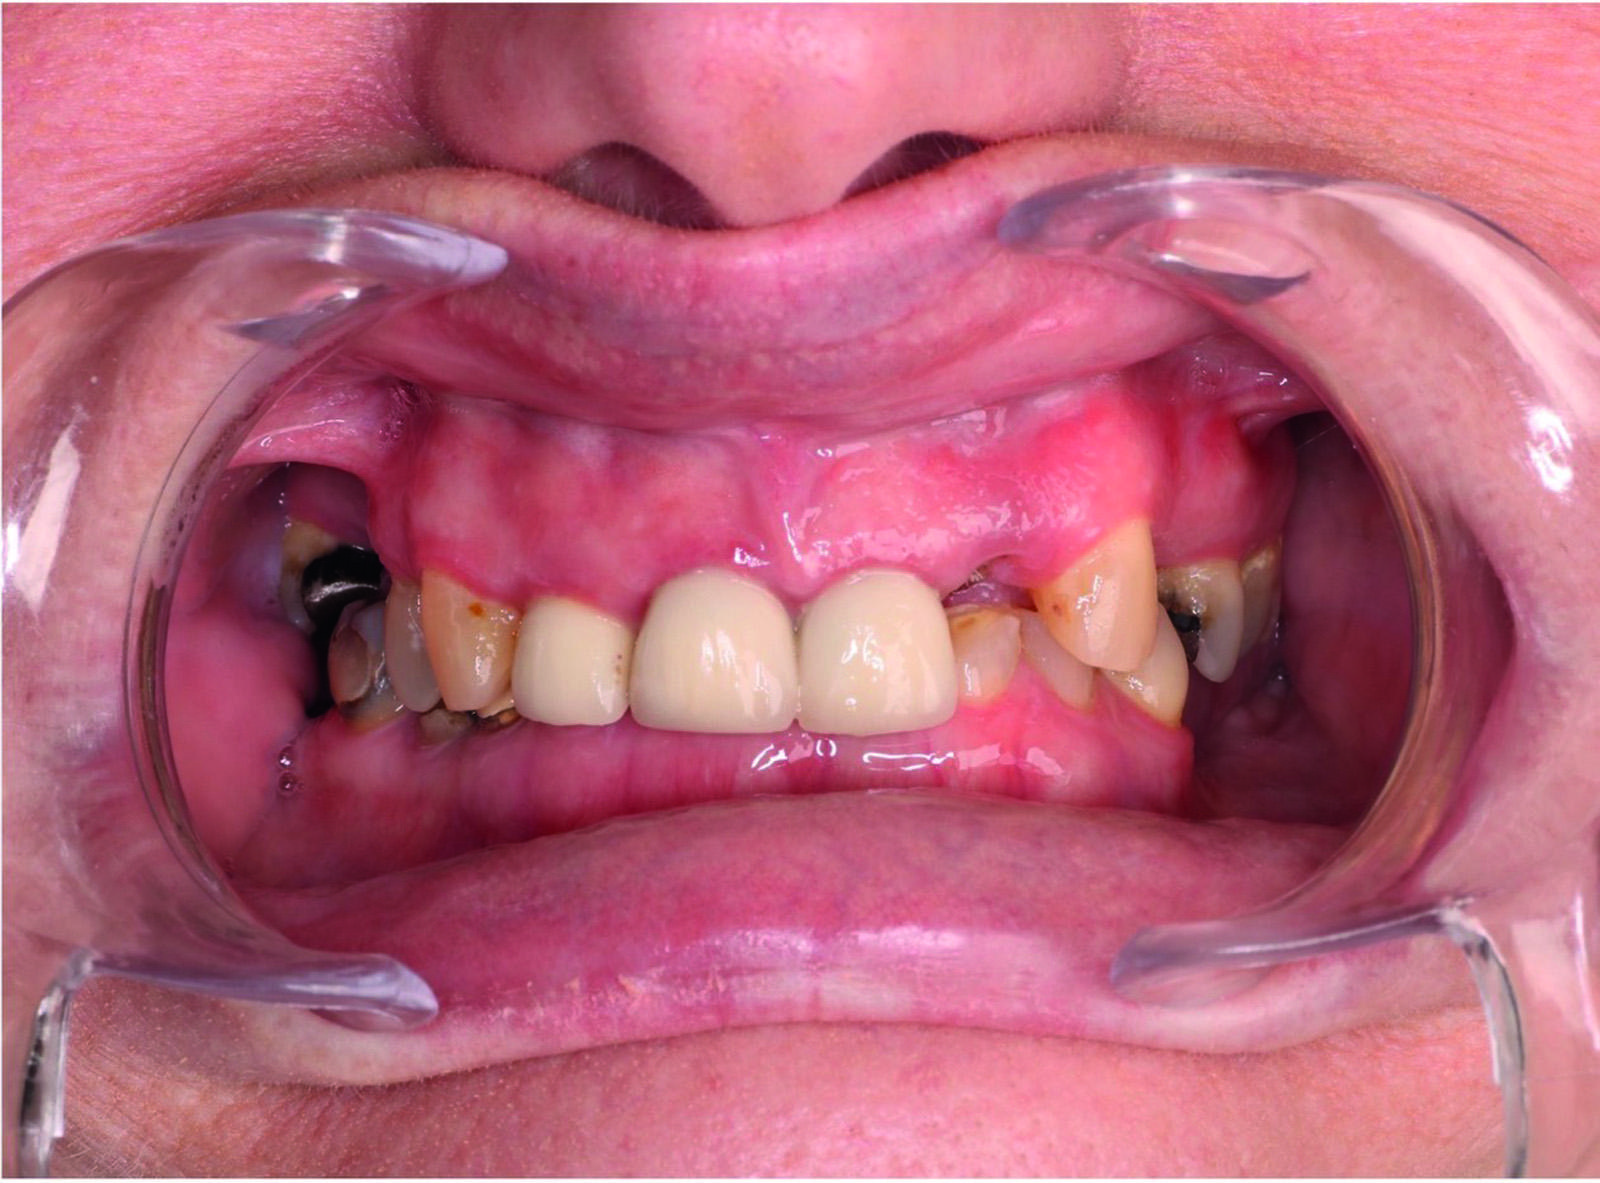 Close up of patients teeth and gums